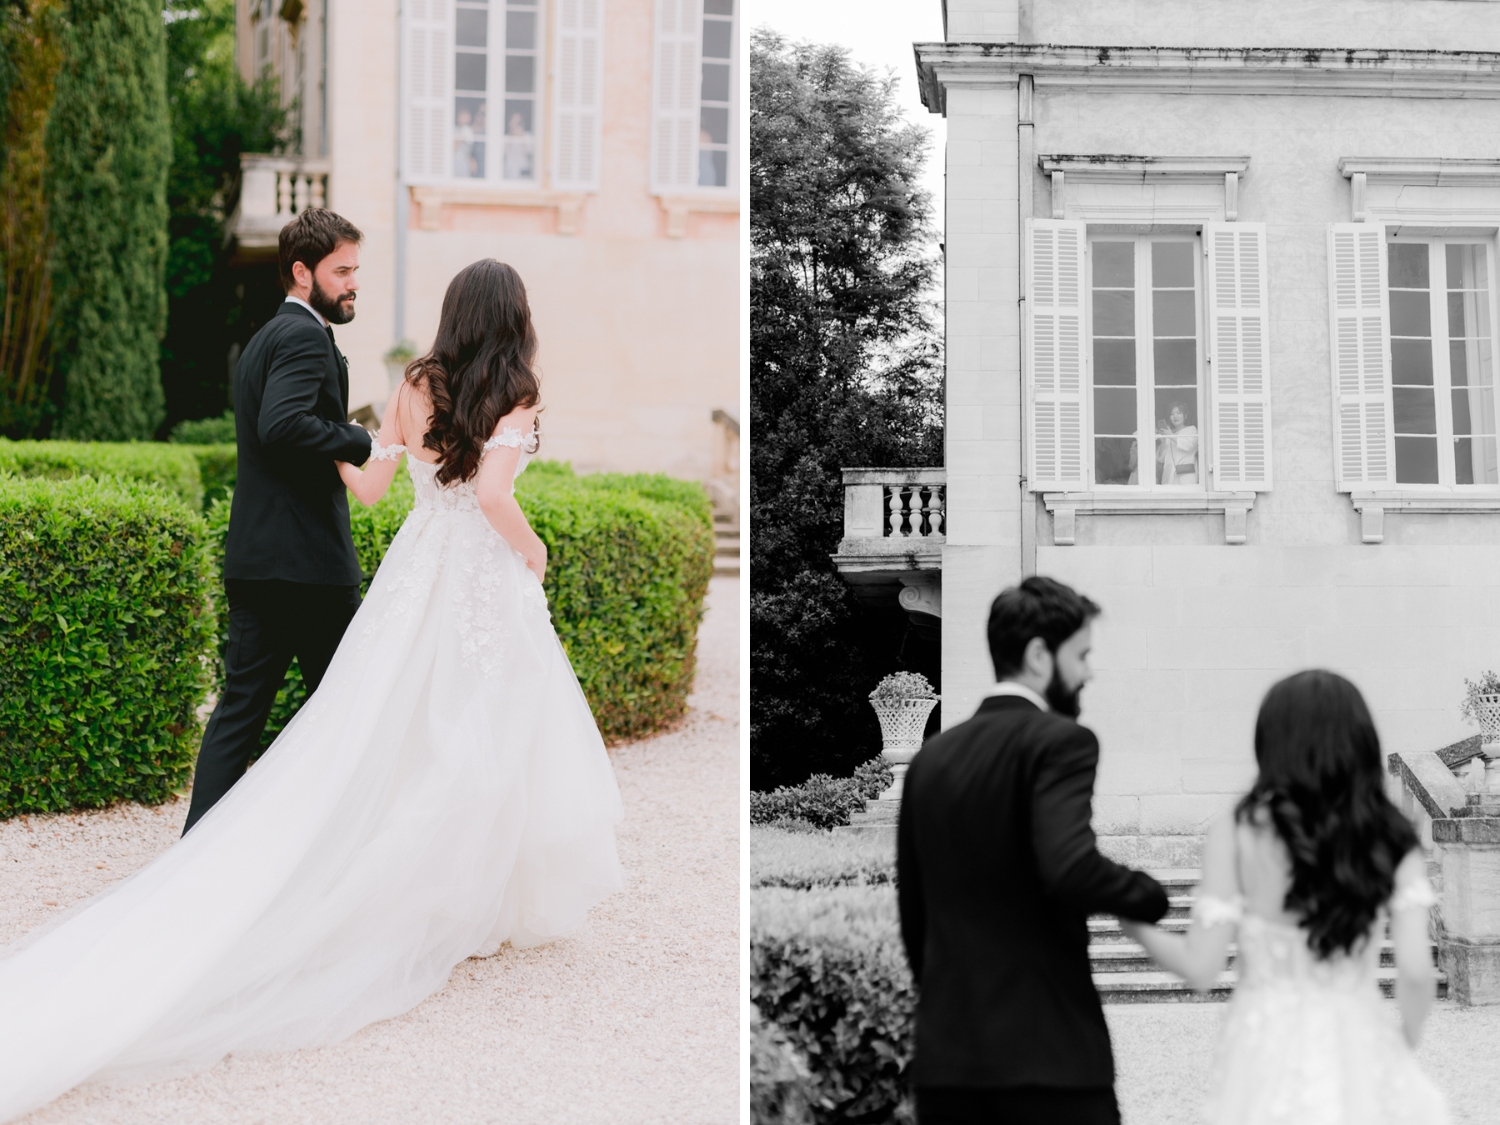 First look at a Spring Wedding at Chateau Martinay in Provence, France